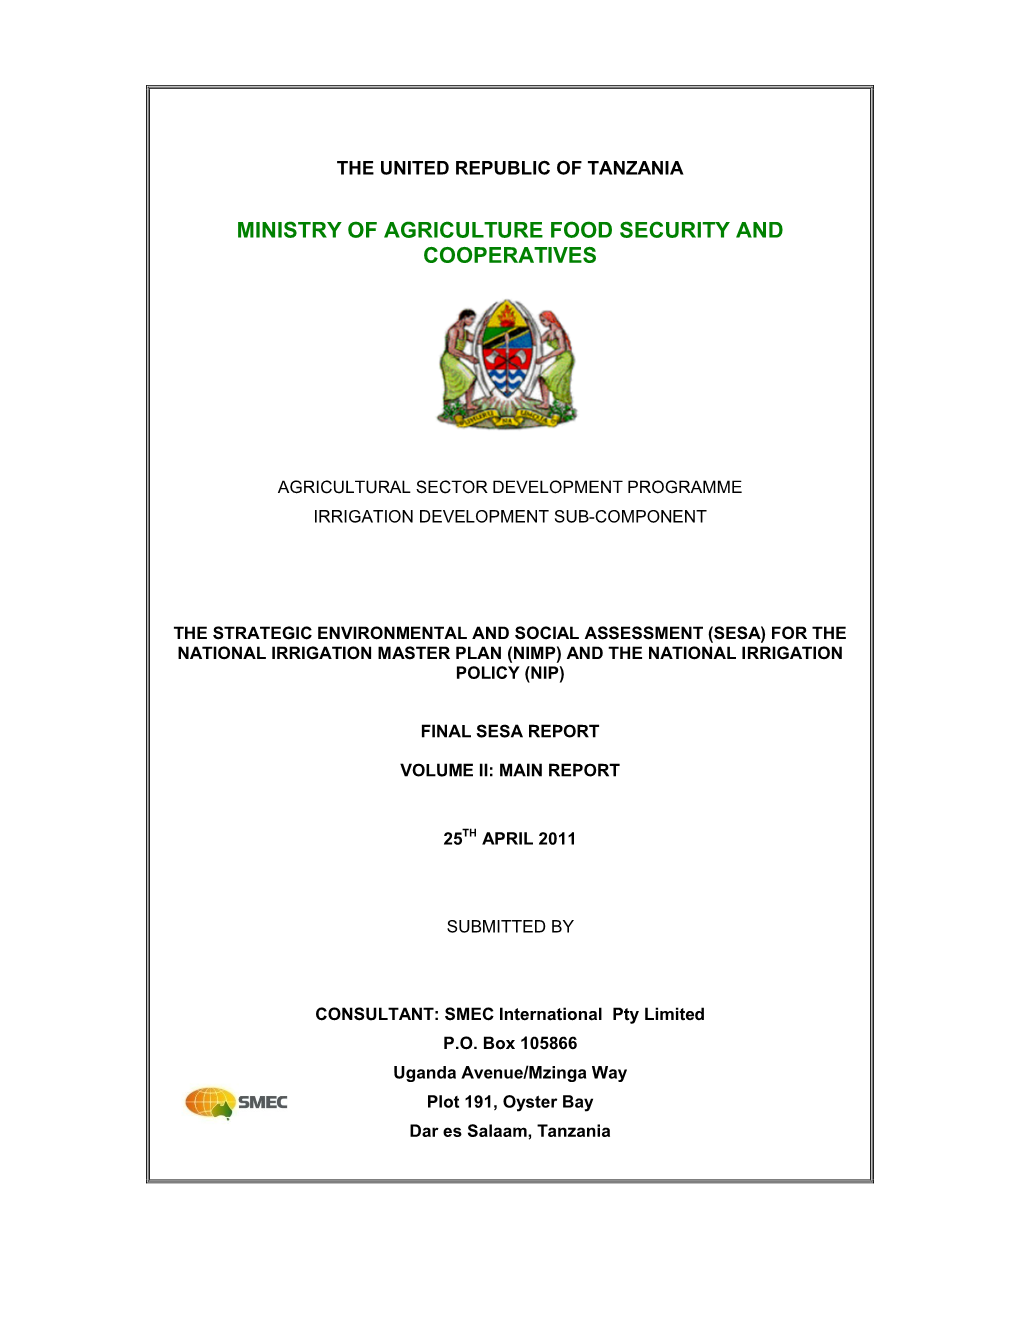 Ministry of Agriculture Food Security and Cooperatives